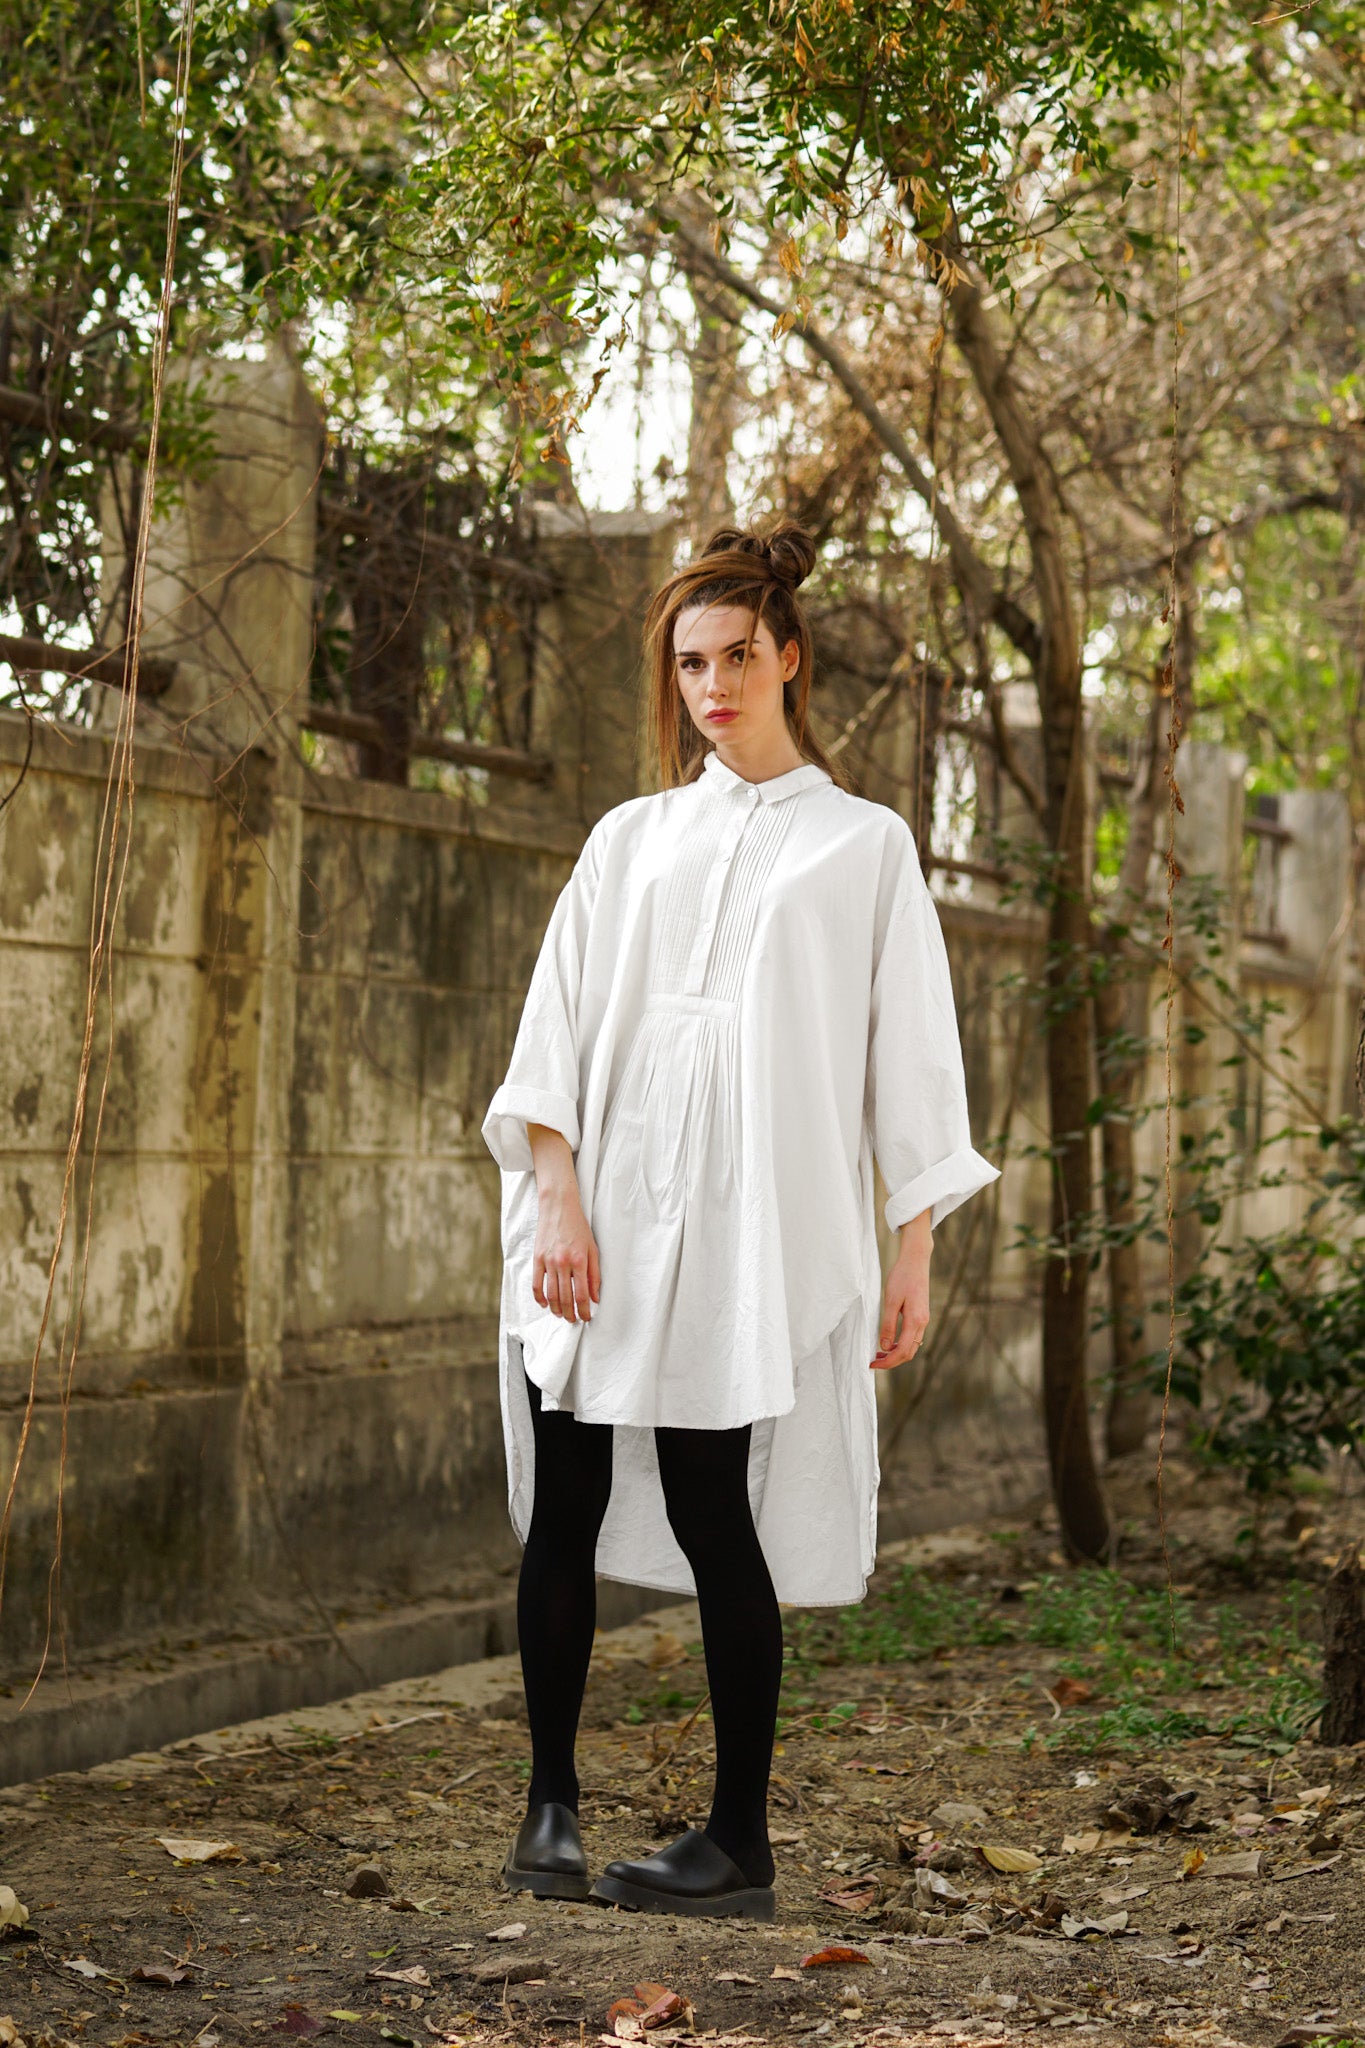 A MegbyDesign model is wearing a white cotton twill oversized dress shirt with a crisp crumpled texture